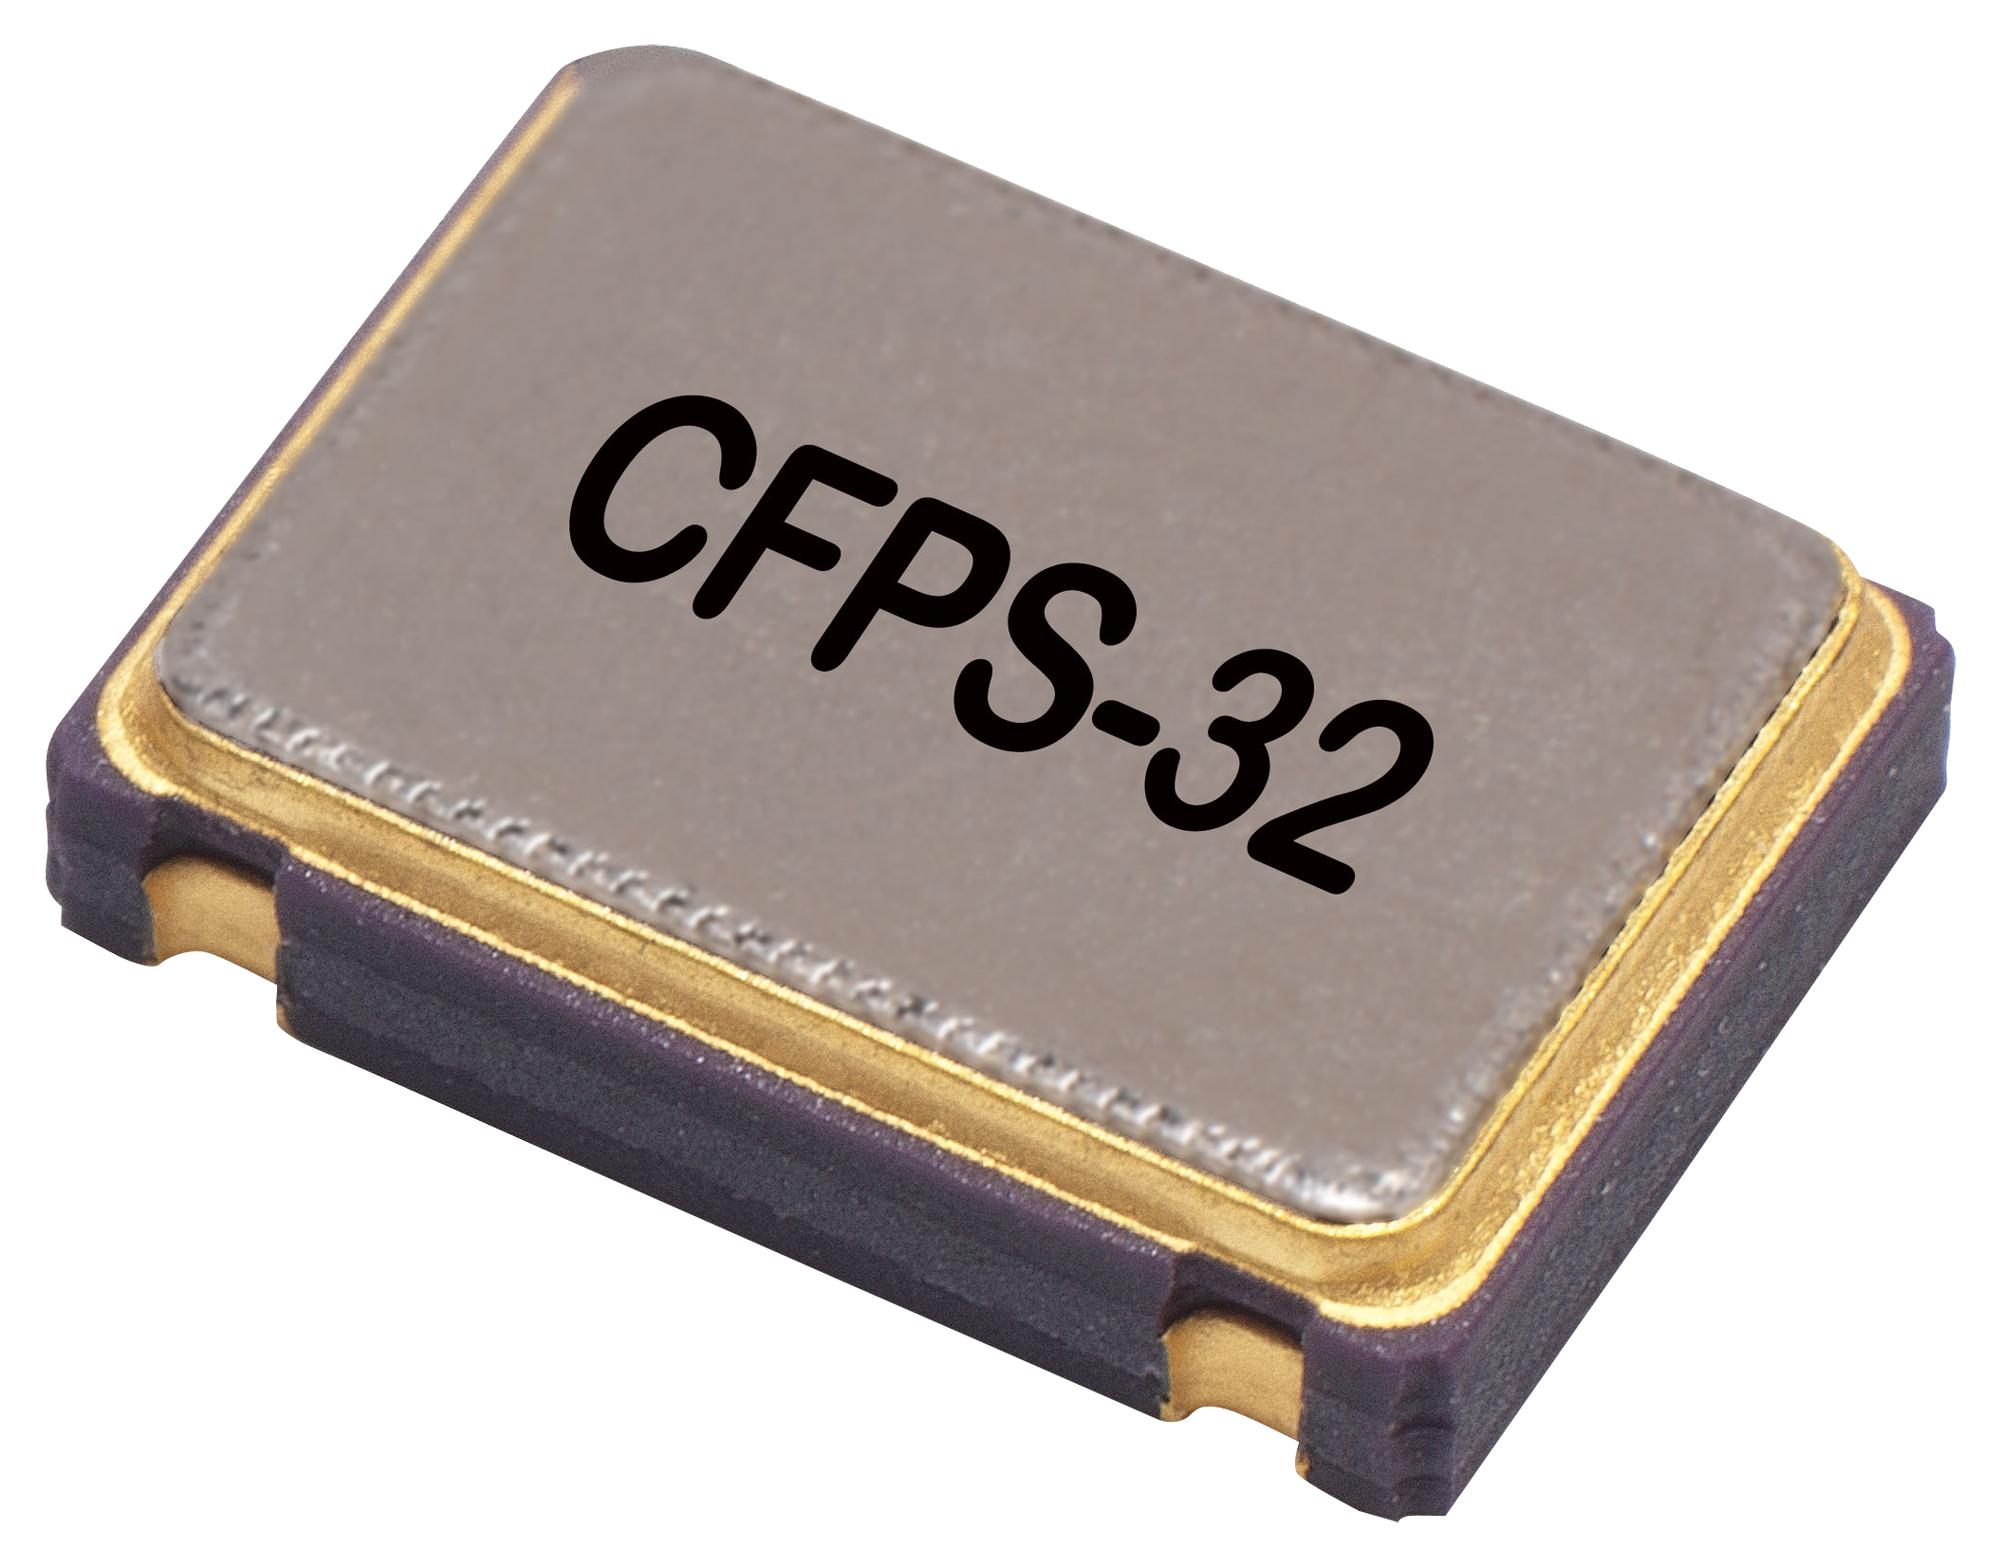 LFSPXO025918 CRYSTAL OSCILLATOR, SMD, 50MHZ IQD FREQUENCY PRODUCTS